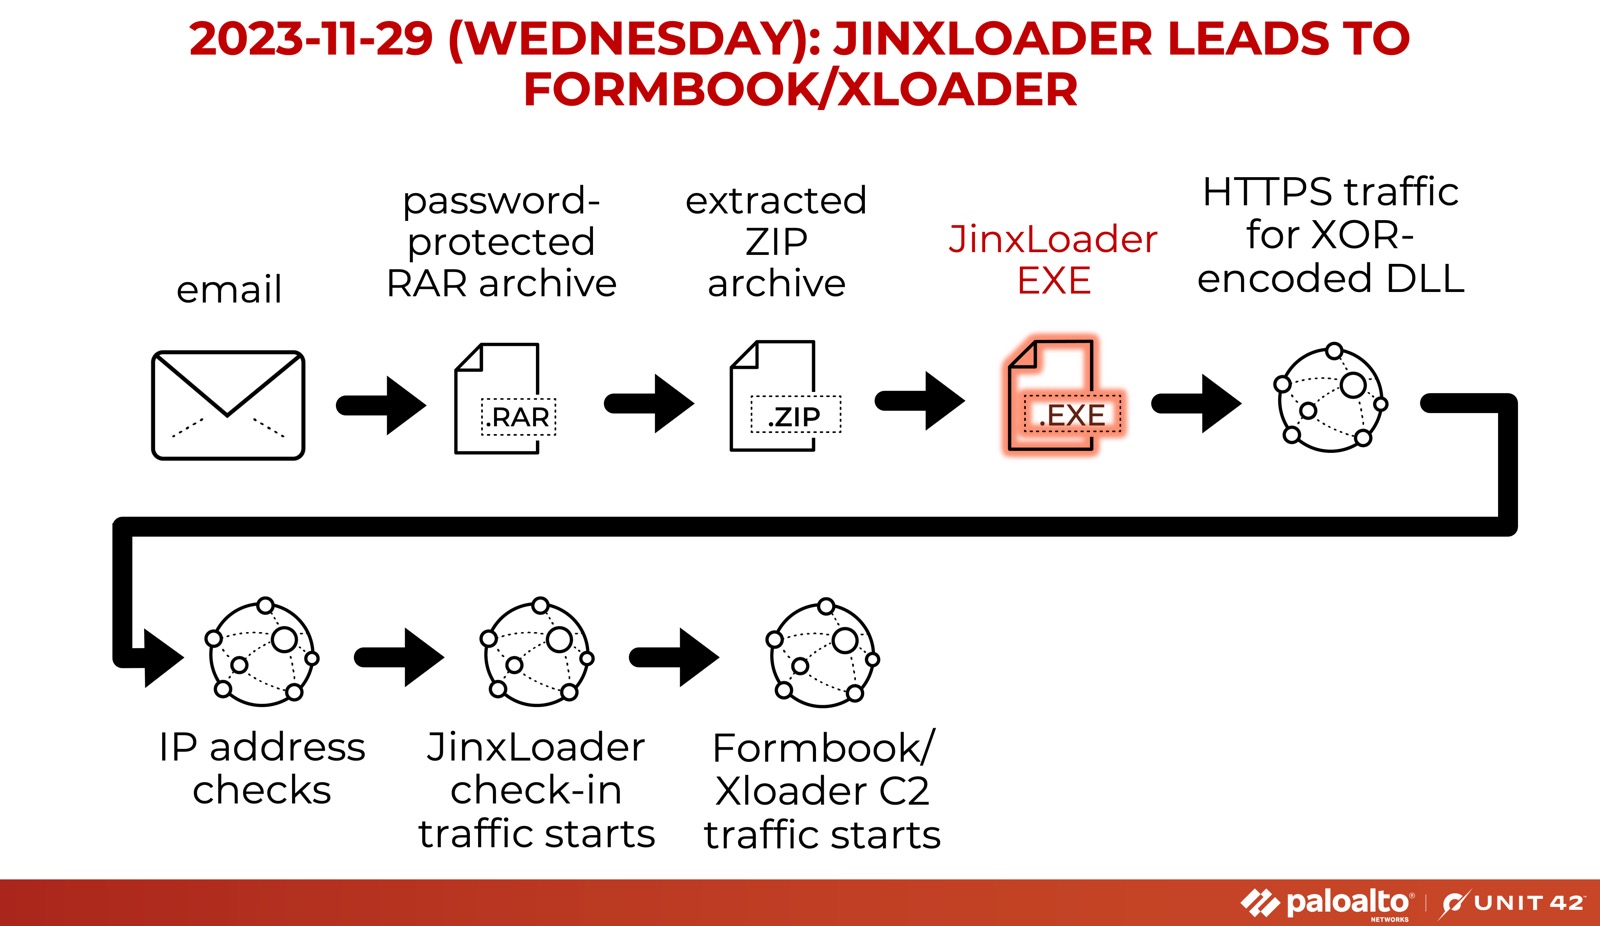 Attack chain: email> password protected RAR archive> extracted ZIP archive>JinxLoader EXE> HTTPS traffic for XOR-encoded DLL>IP address checks>JinxLoader check-in traffic starts>Formbook/Xloader C2 traffic starts